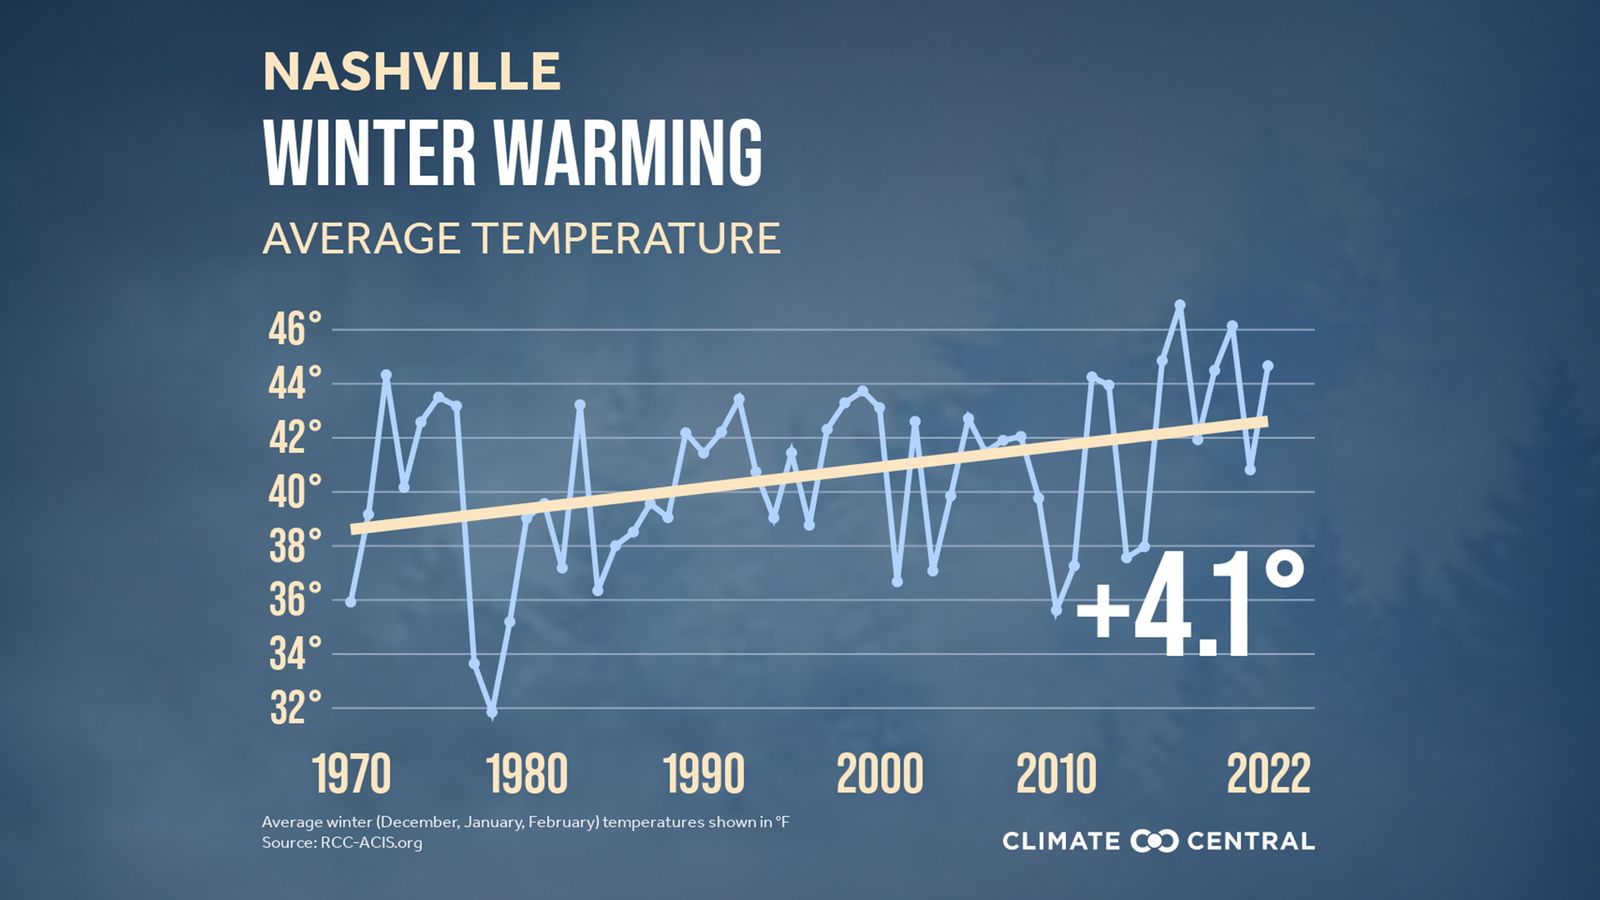 Trends show Nashville winters getting warmer Axios Nashville